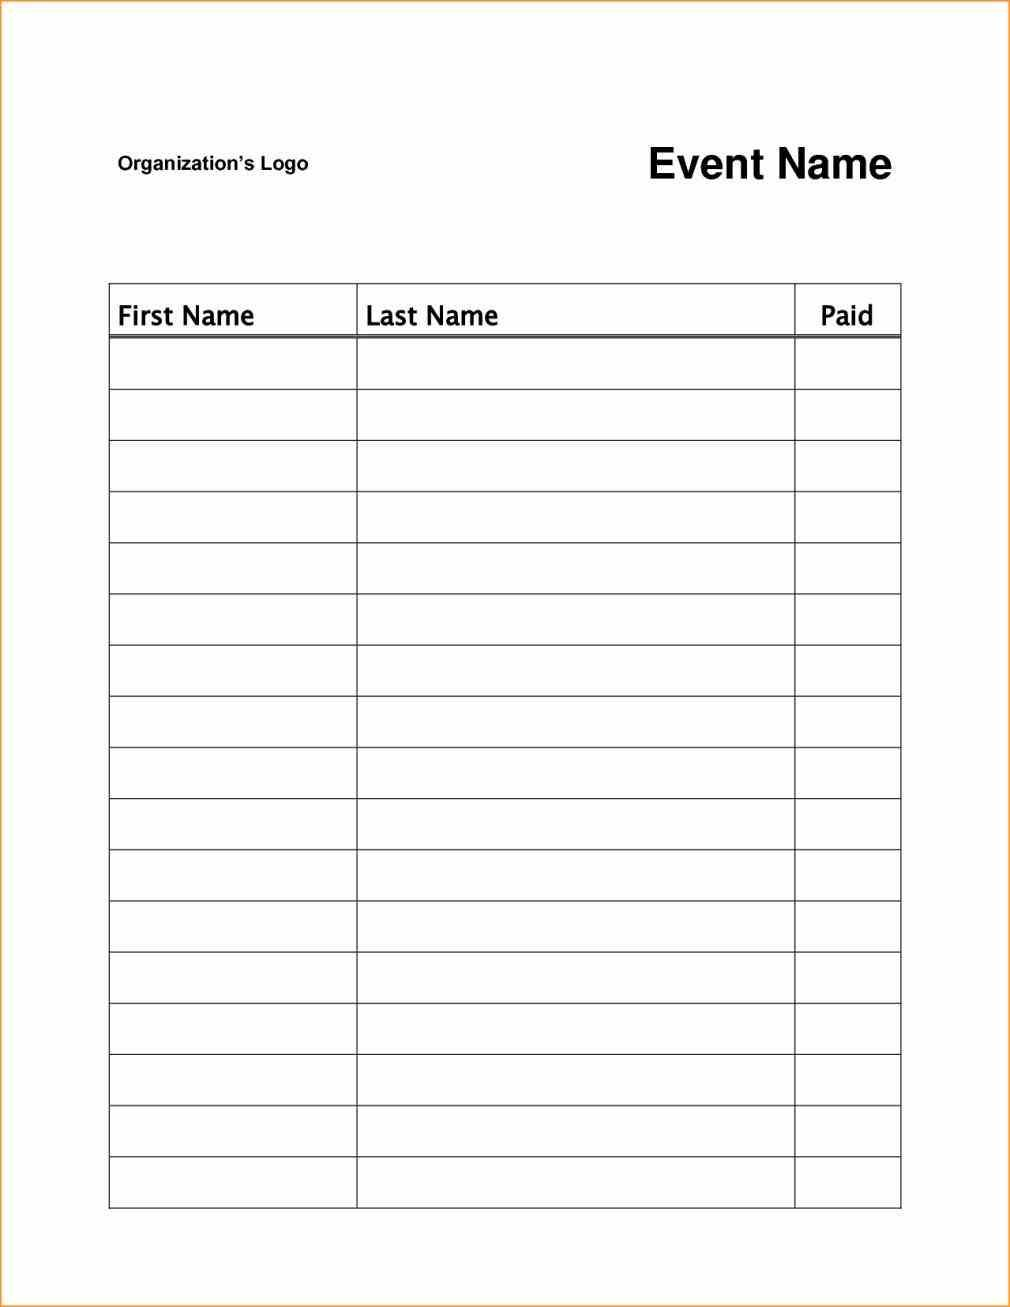 Event Or Class Workshop Forms A Sign Up Sheet Template Word Simple - Free Printable Sign Up Sheet